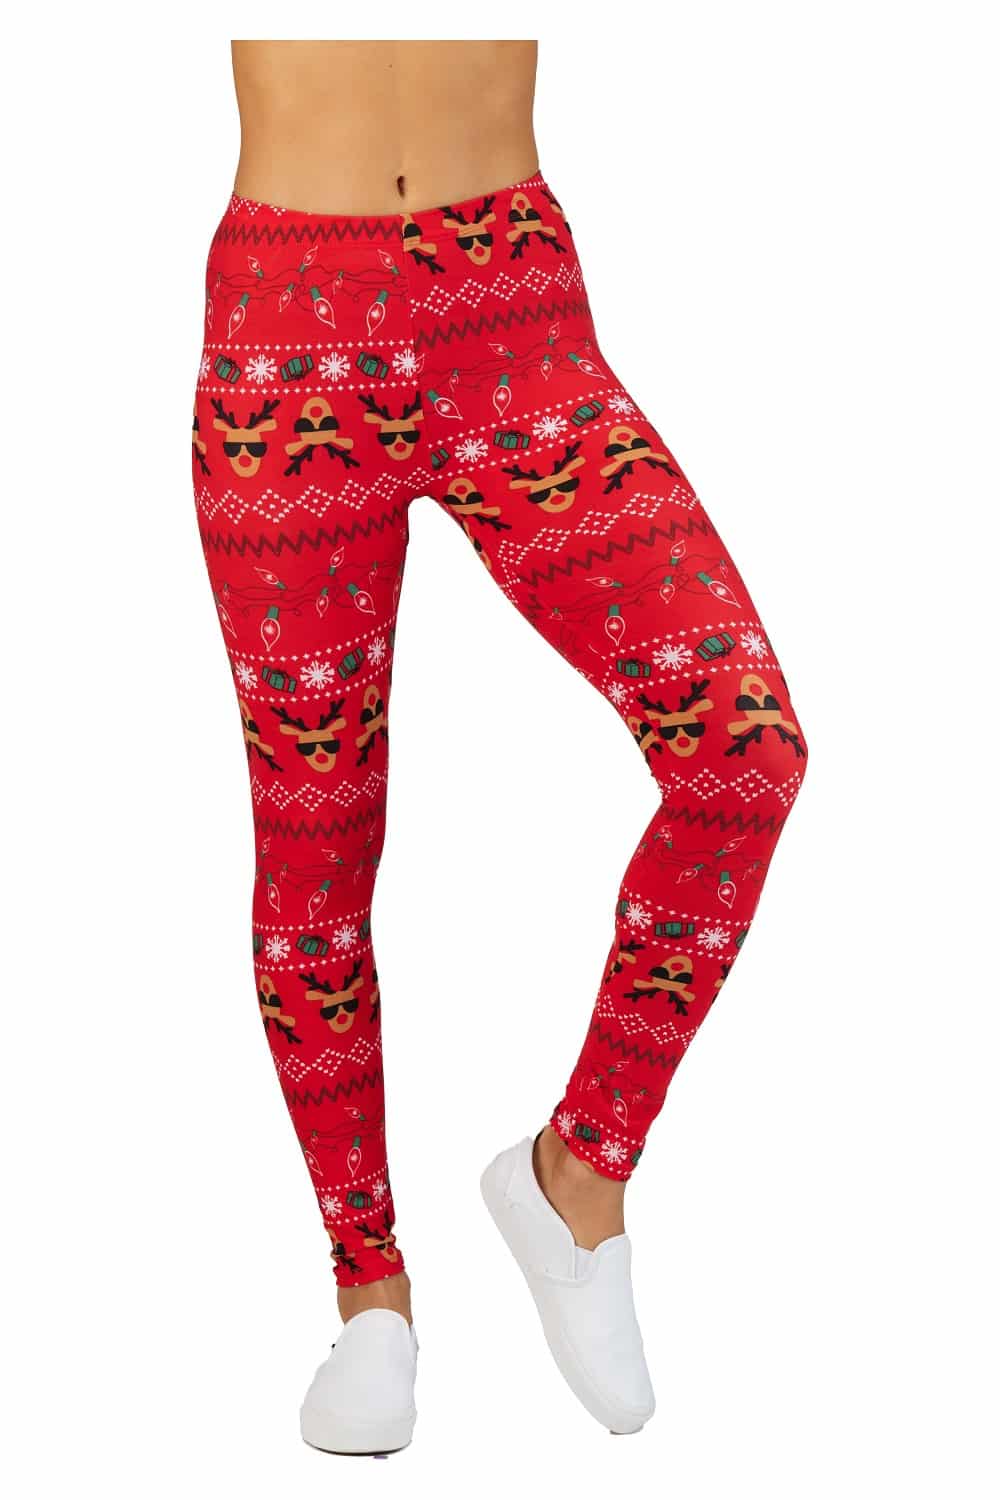 kapitalisme antwoord Plaatsen Christmas Print Ankle Leggings 1 inch Elastic Waisted with Funy Deer Snow  and Gift Box - Its All Leggings